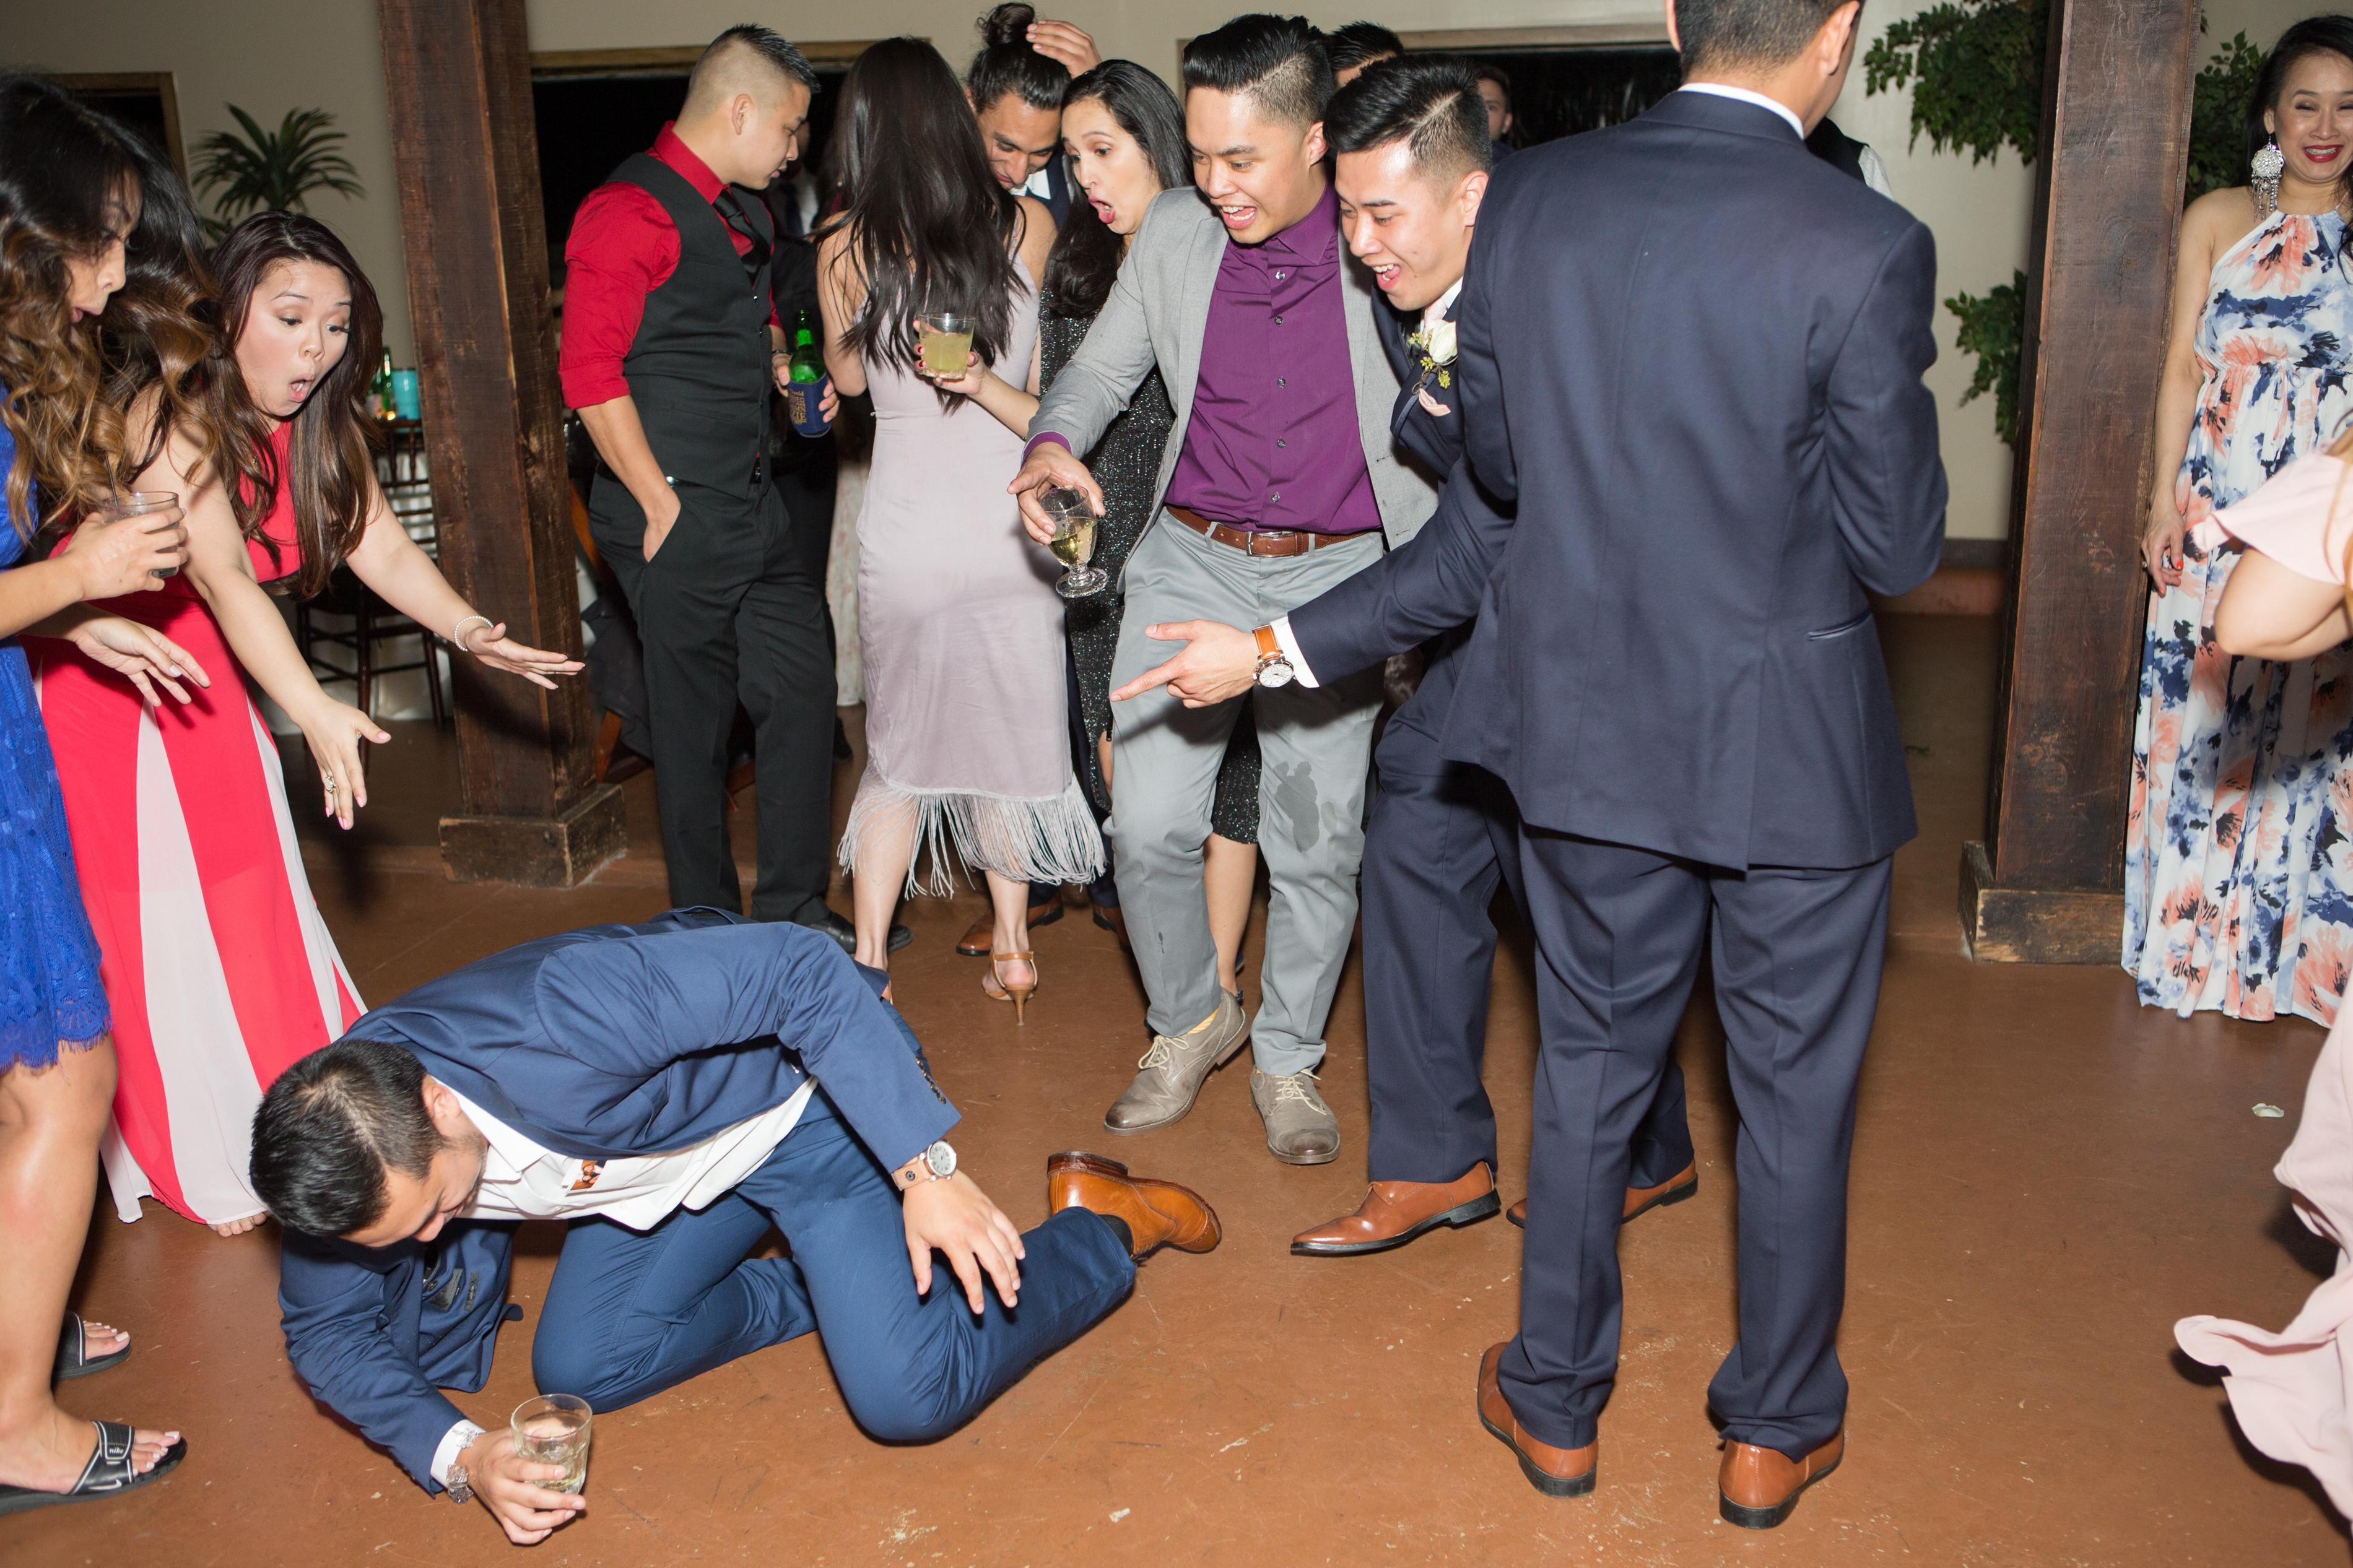 You can tell who my real close friends are by their facial reactions as I fell on the dance floor.